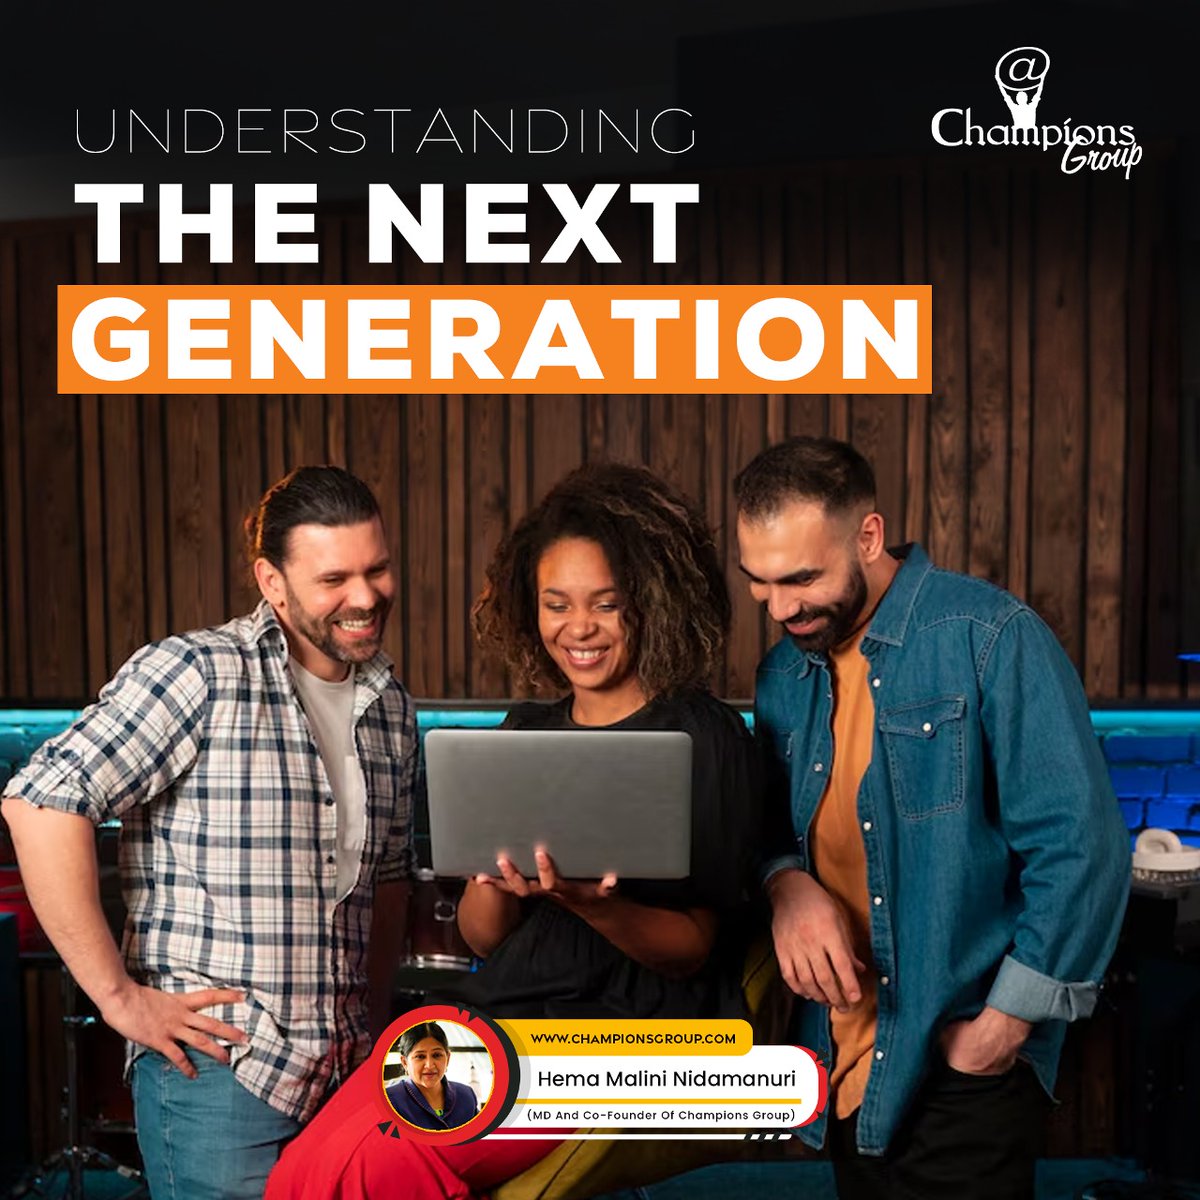 #GenZ is shaping the future with their unique perspectives, values, and preferences. From social media trends to activism, take a deep dive into Gen Z culture and discover what makes this generation tick. #YouthCulture #DigitalNative #Trends #Activism #Hemamalini #ChampionsGroup